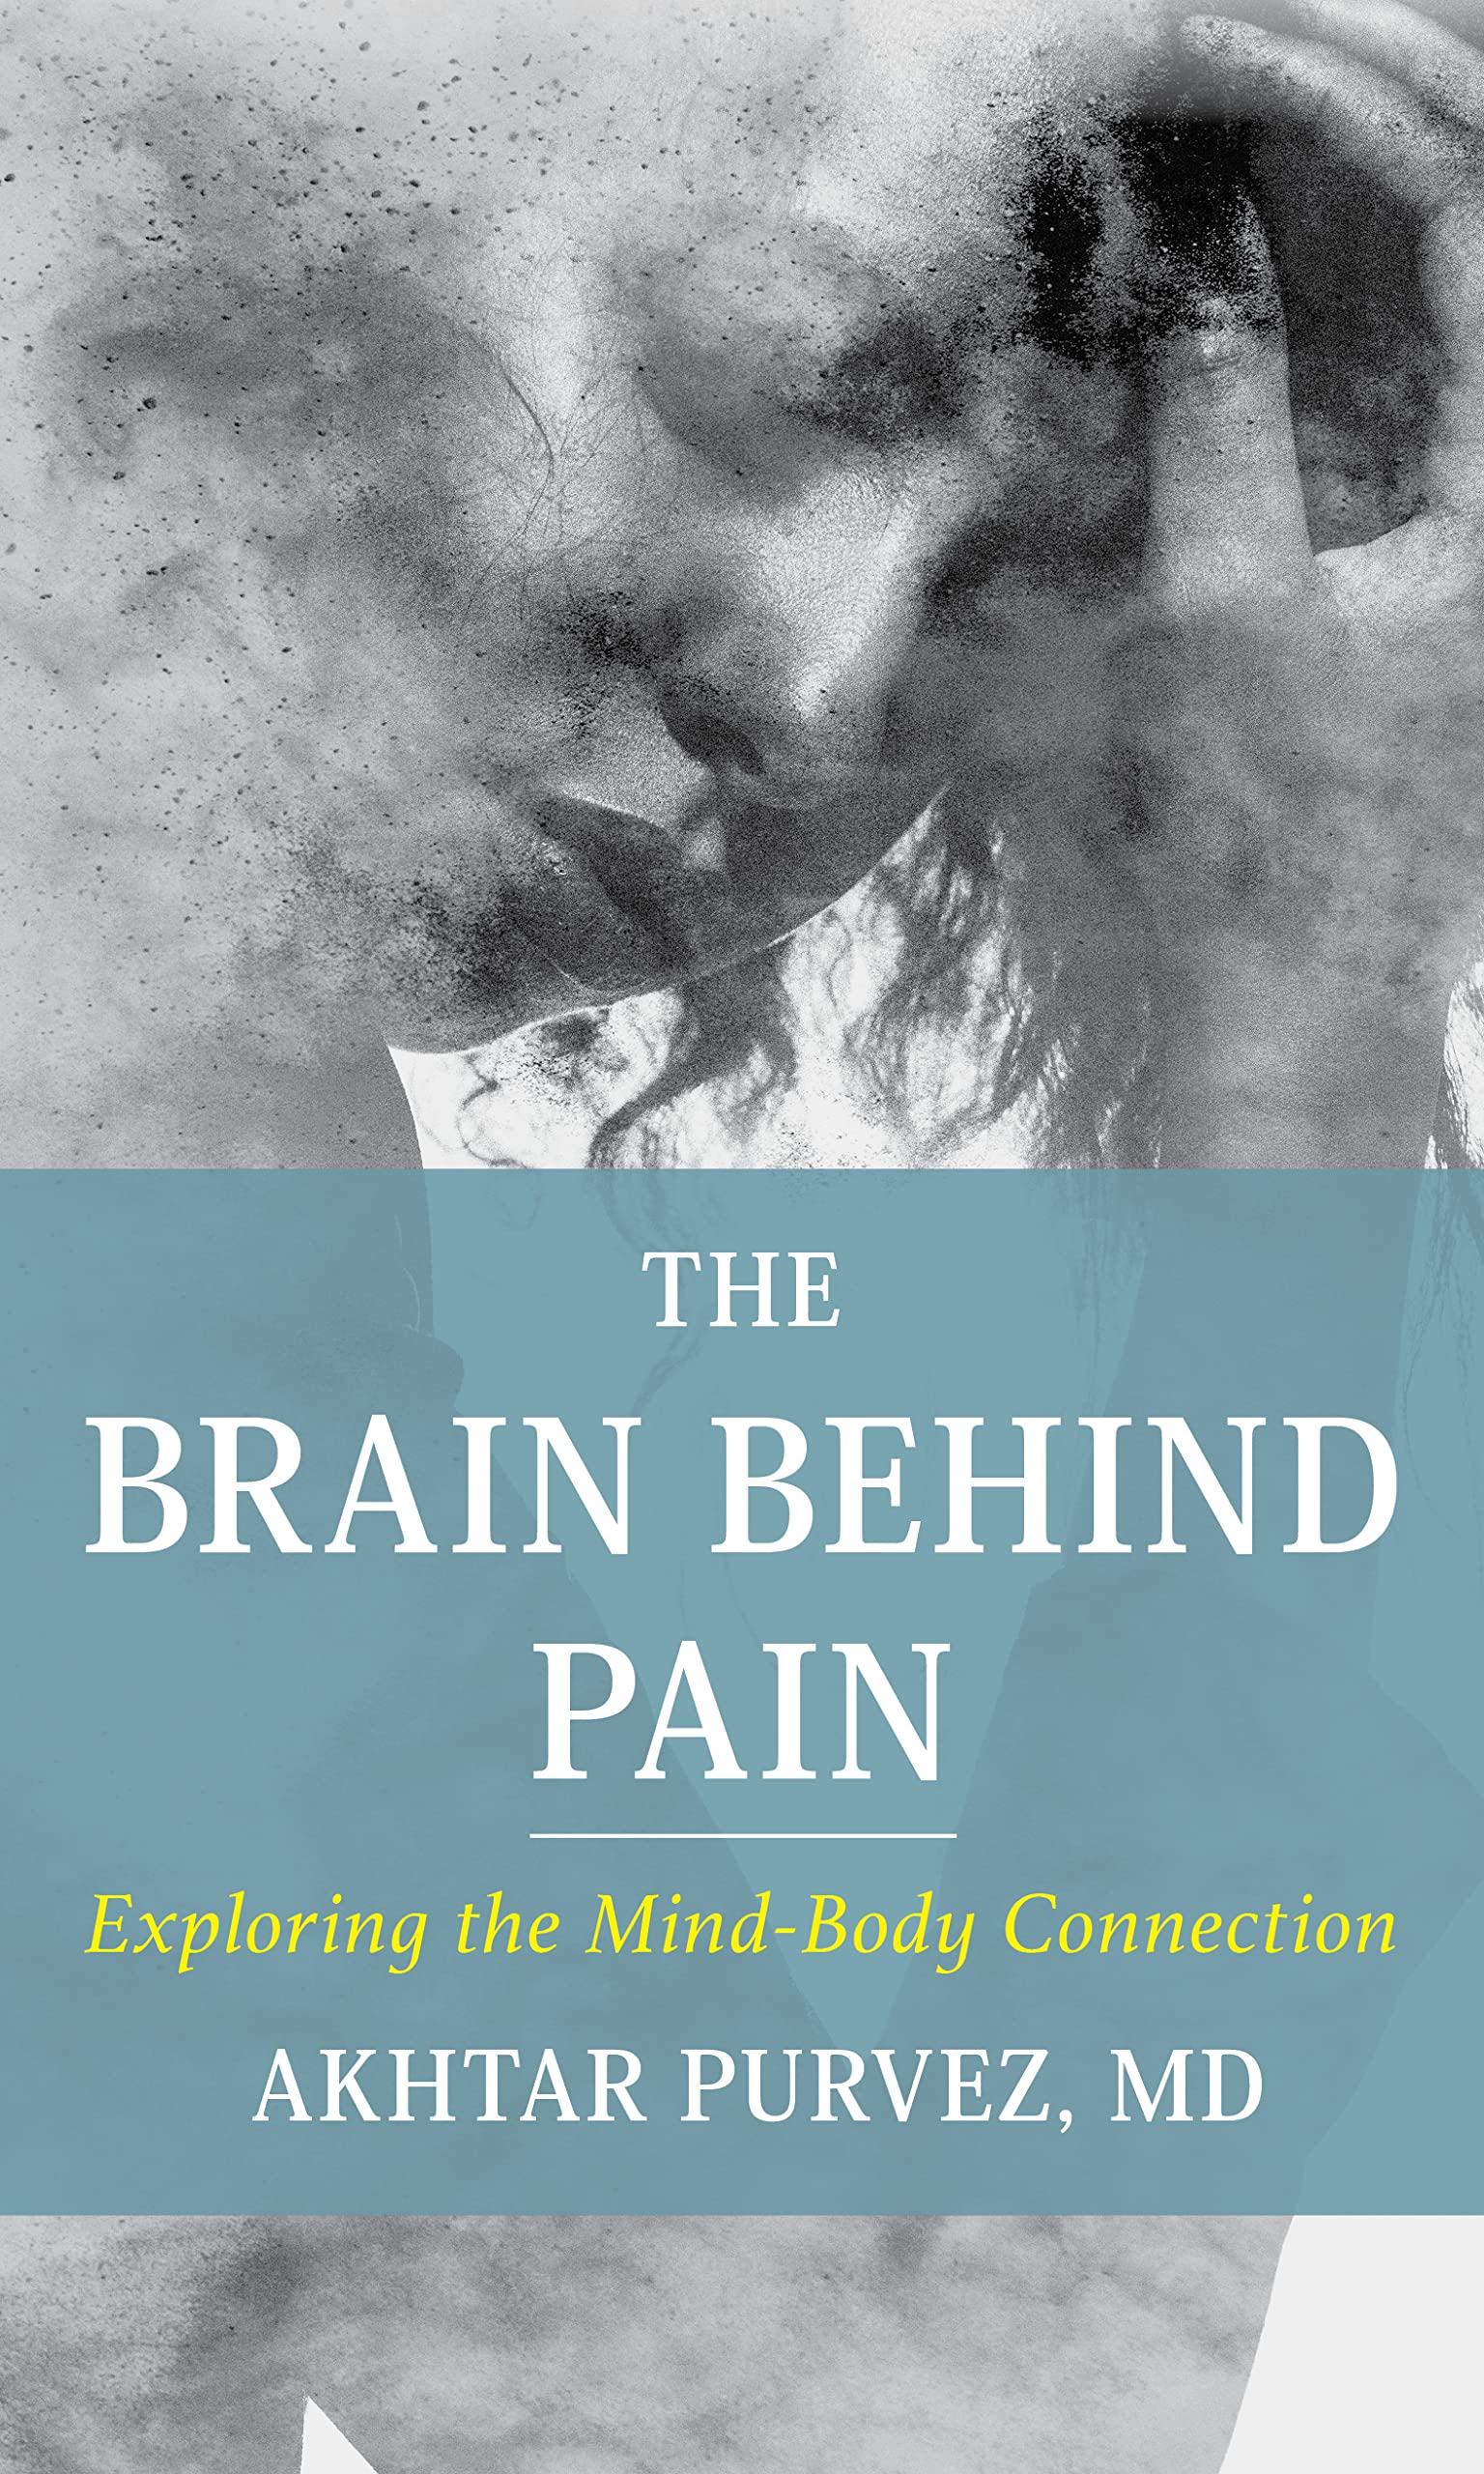 The Brain Behind Pain: Exploring the Mind-Body Connection